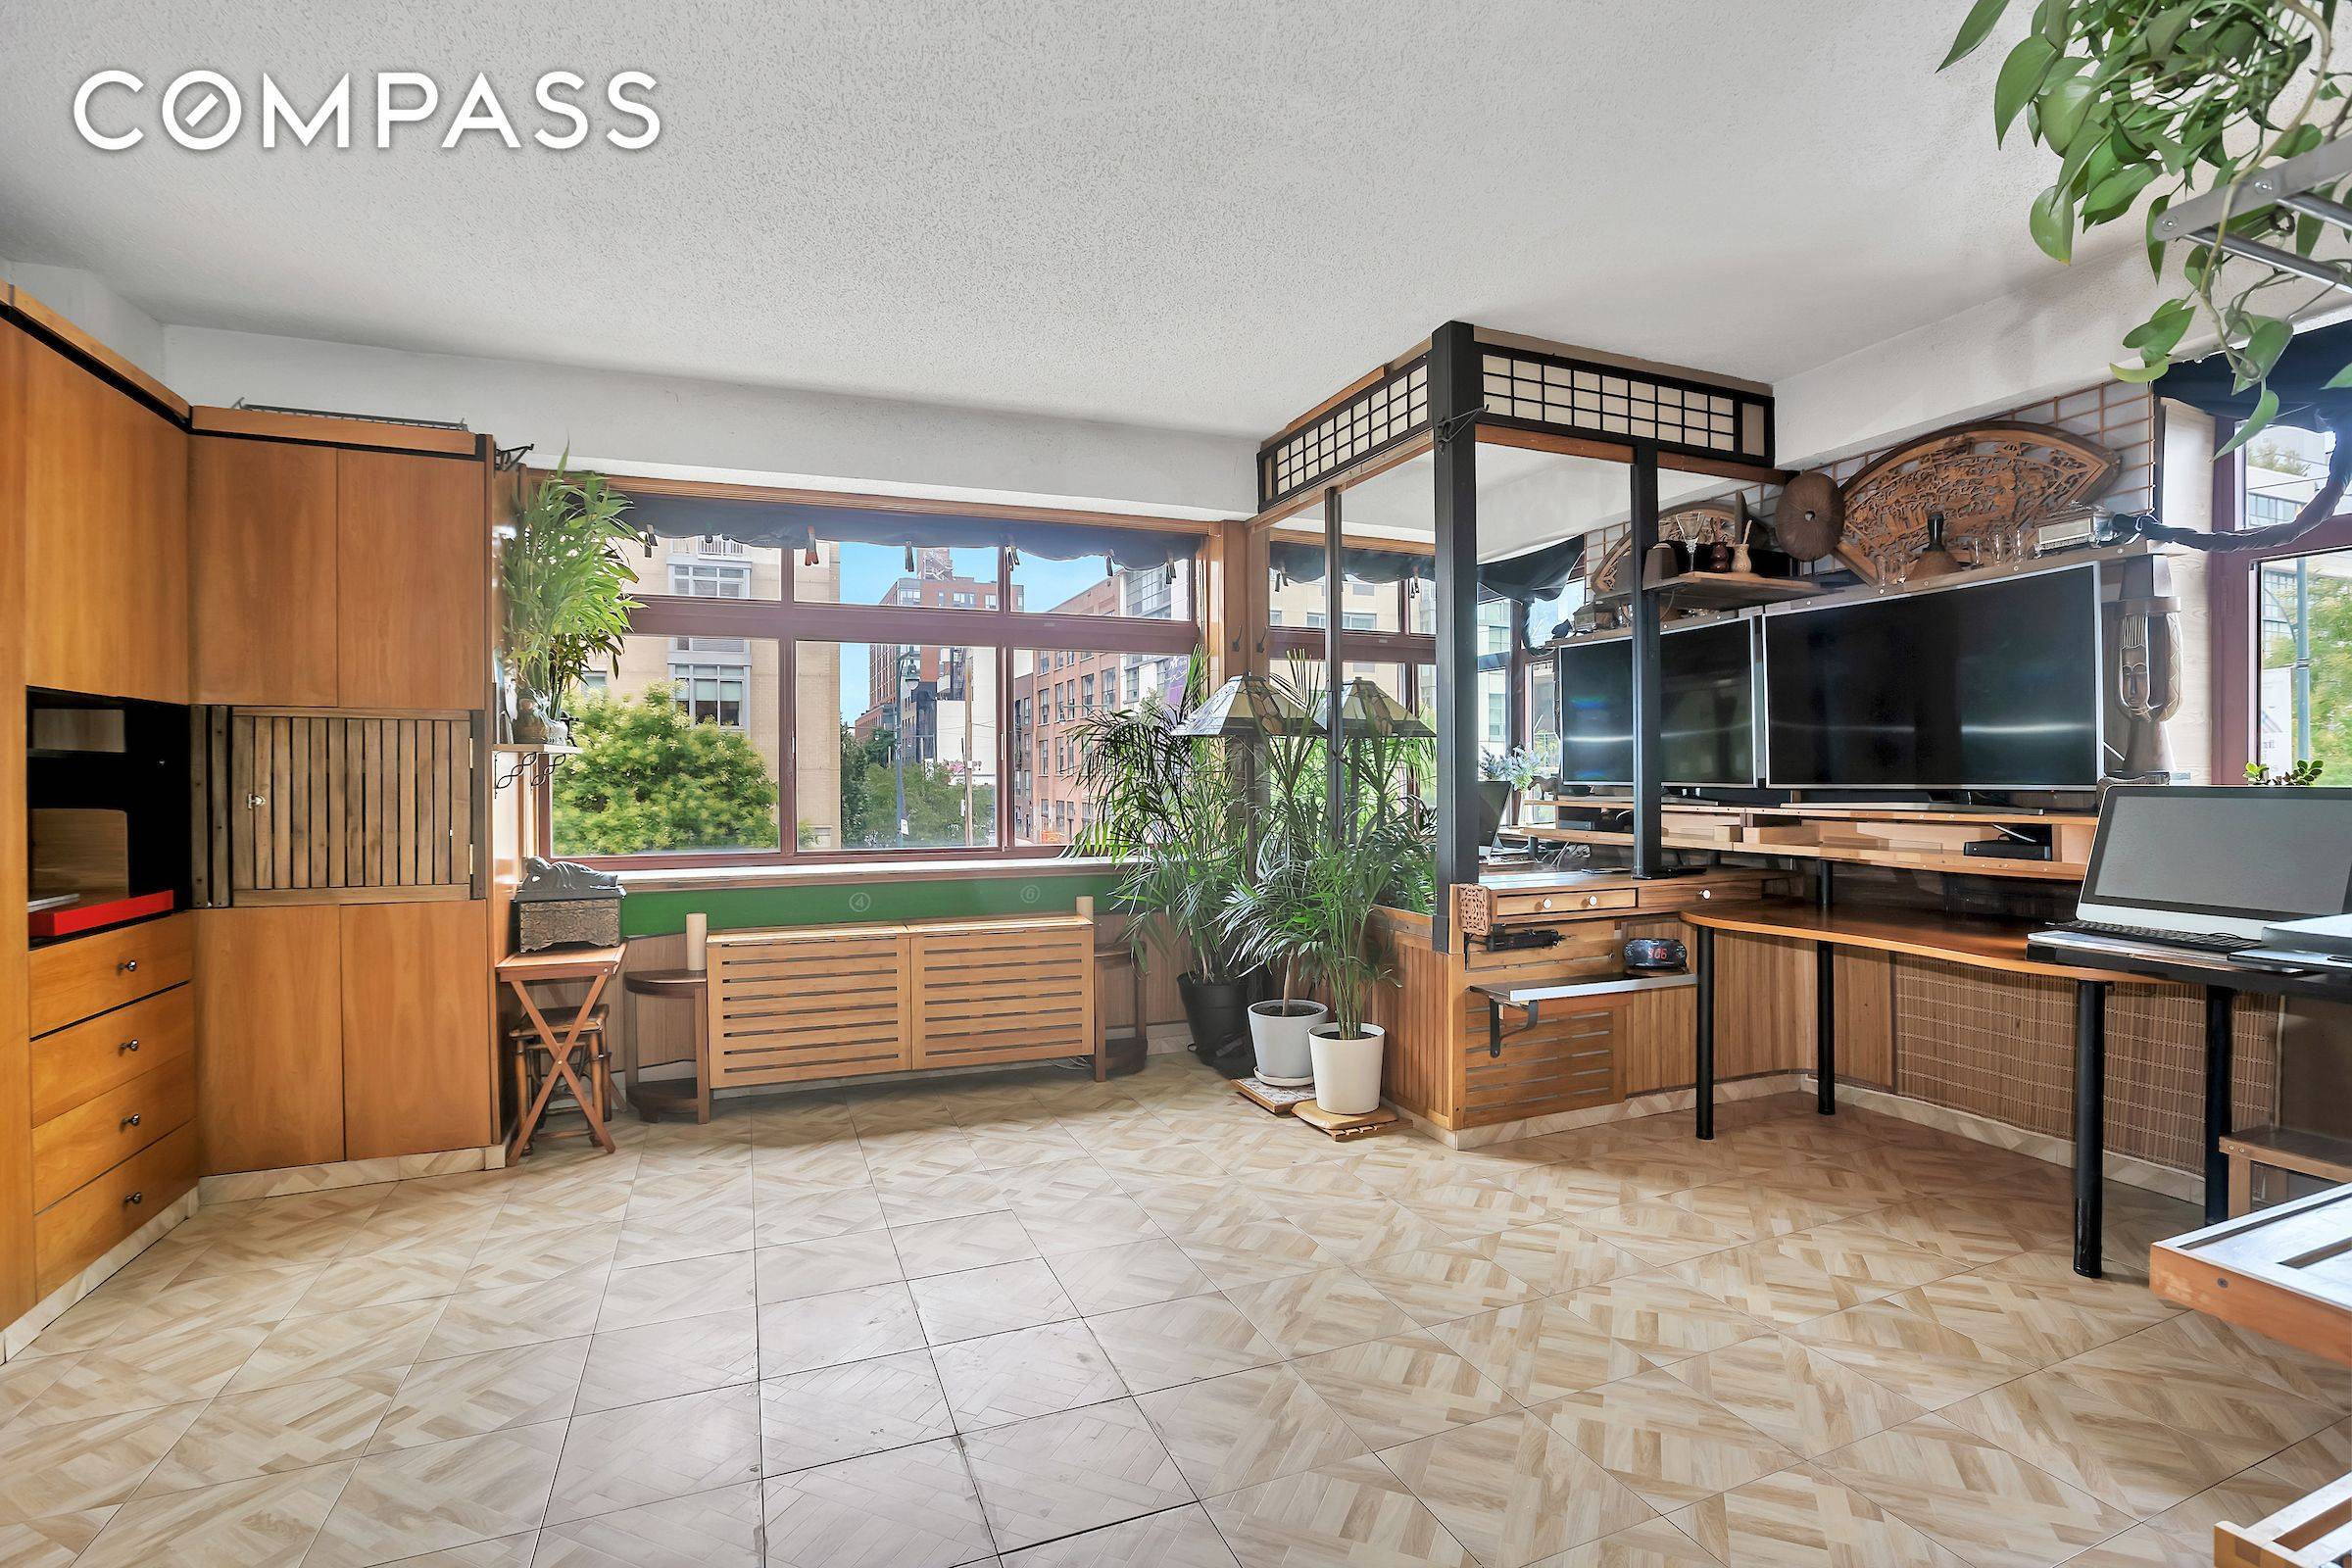 You will be transported to another place in this Far East styled fully customized Studio that feels like a Zen Garden.